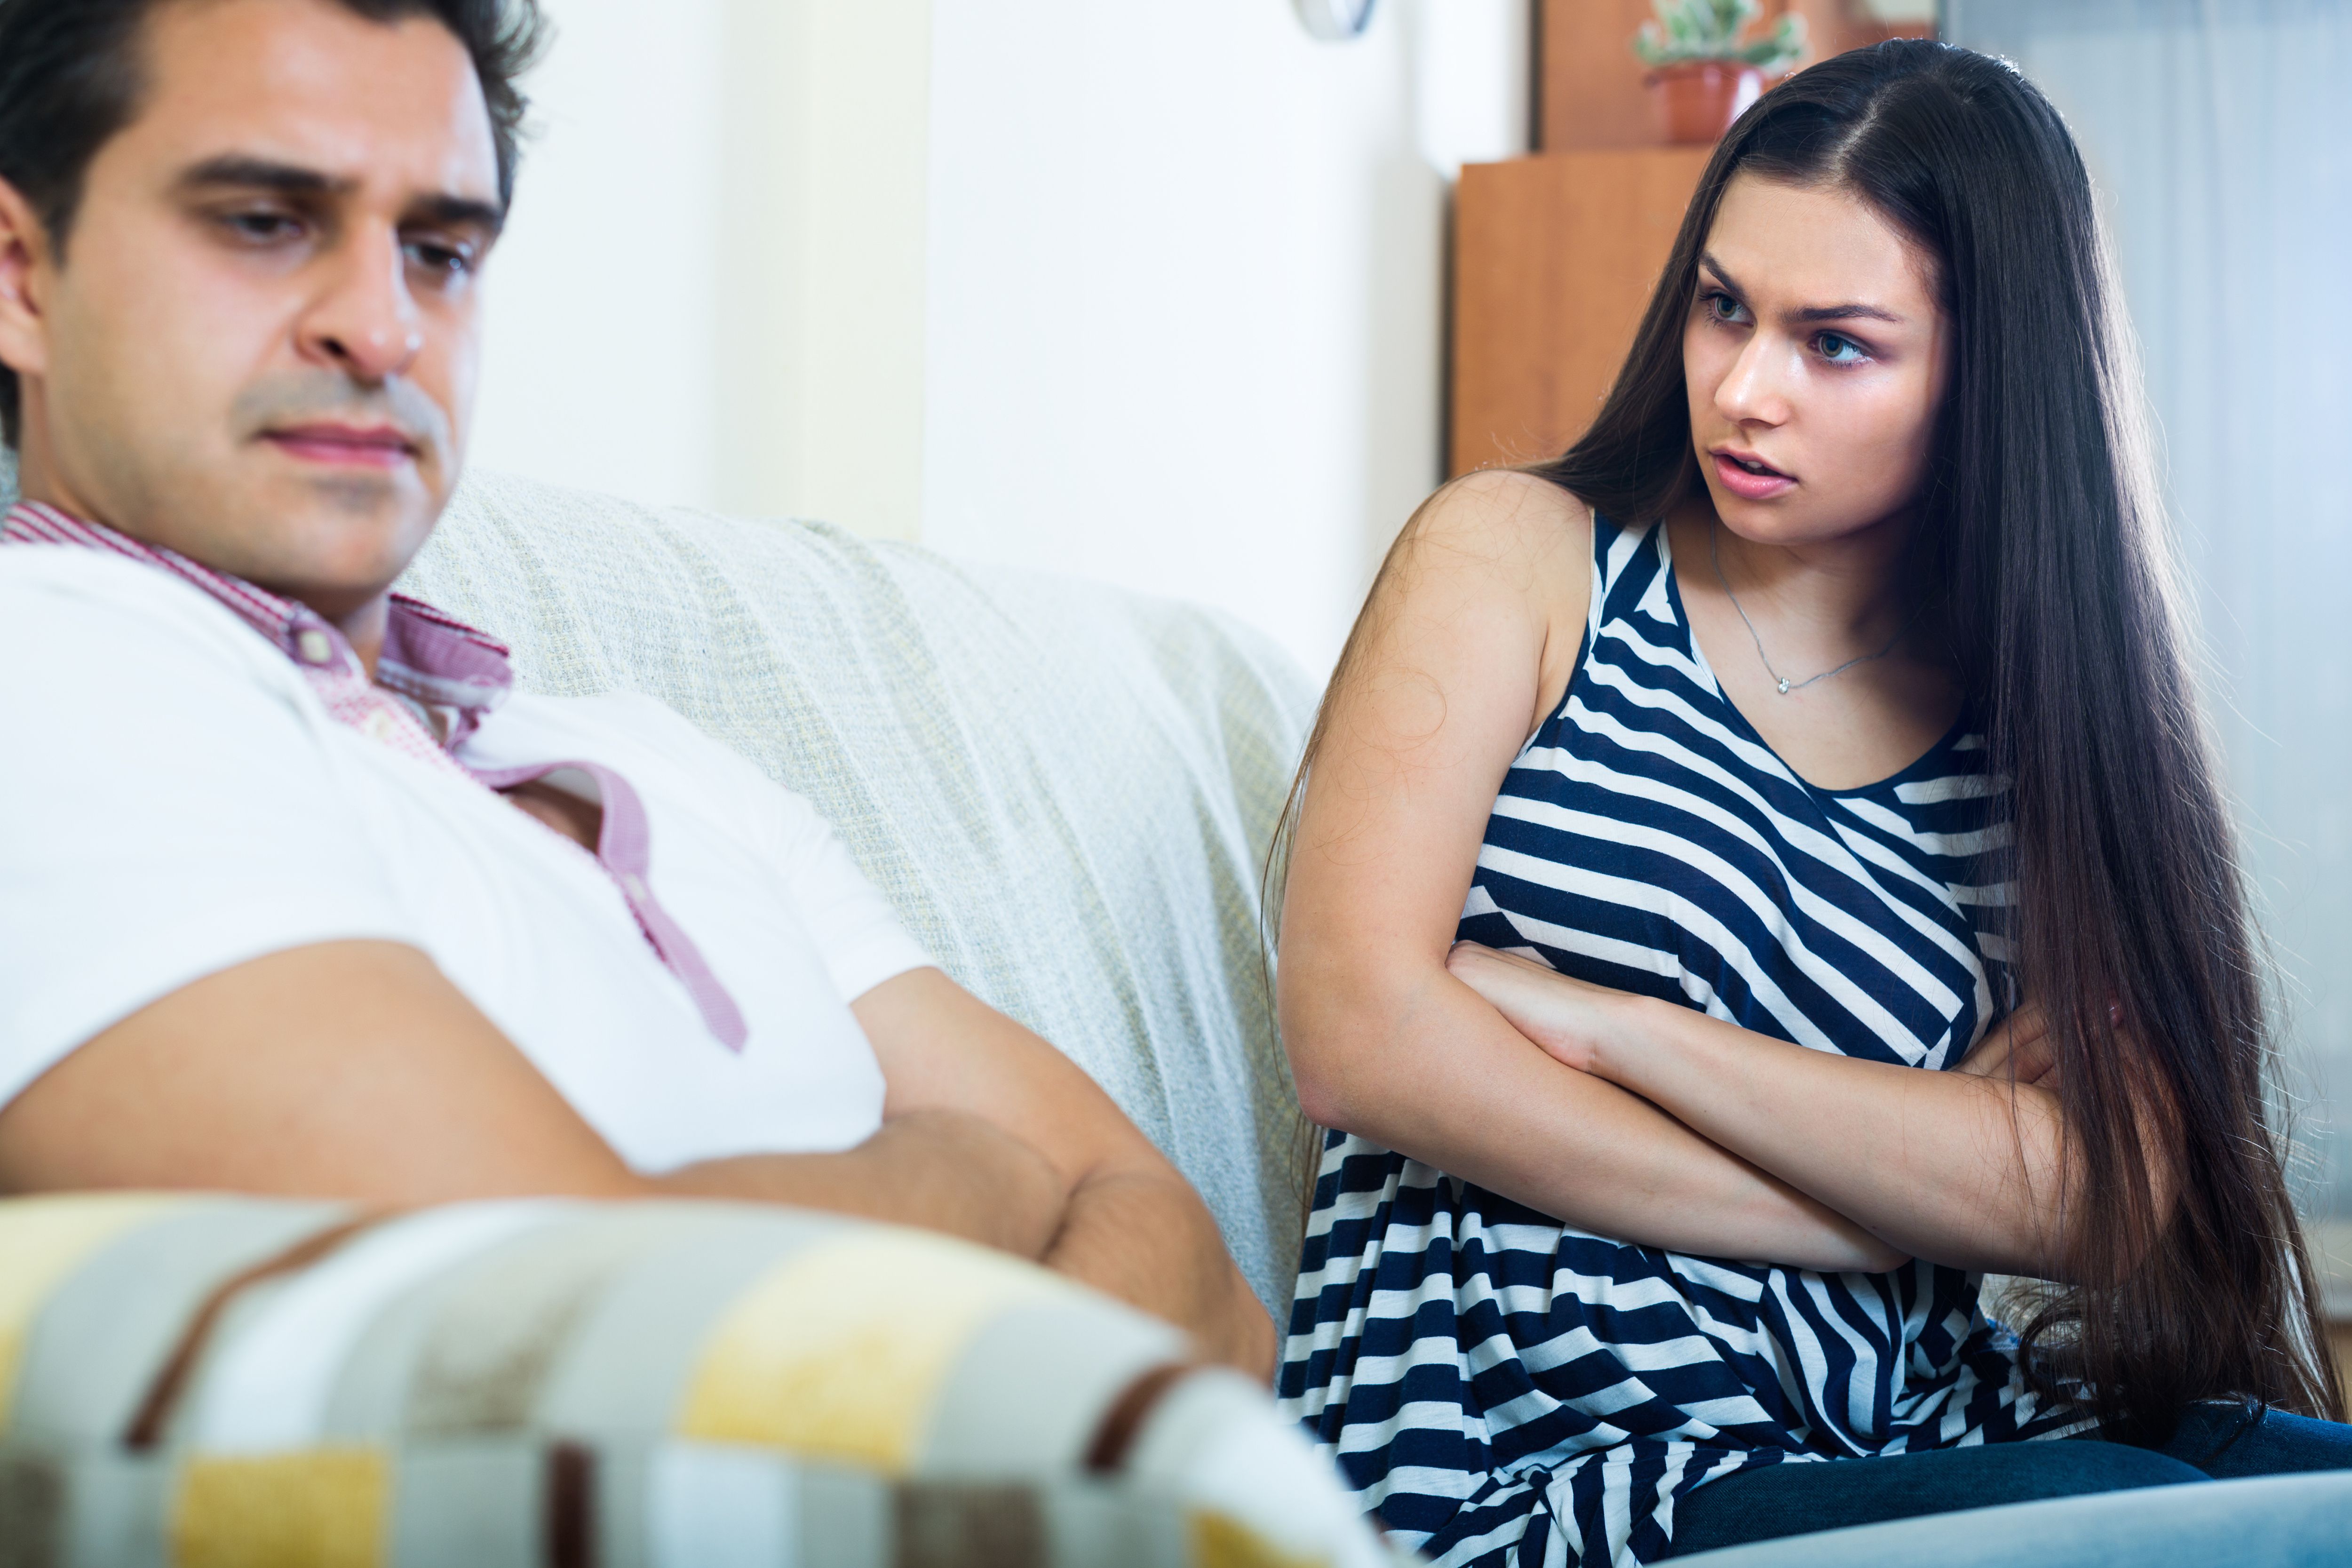 A woman looks upset while talking to her husband. | Source: Shutterstock